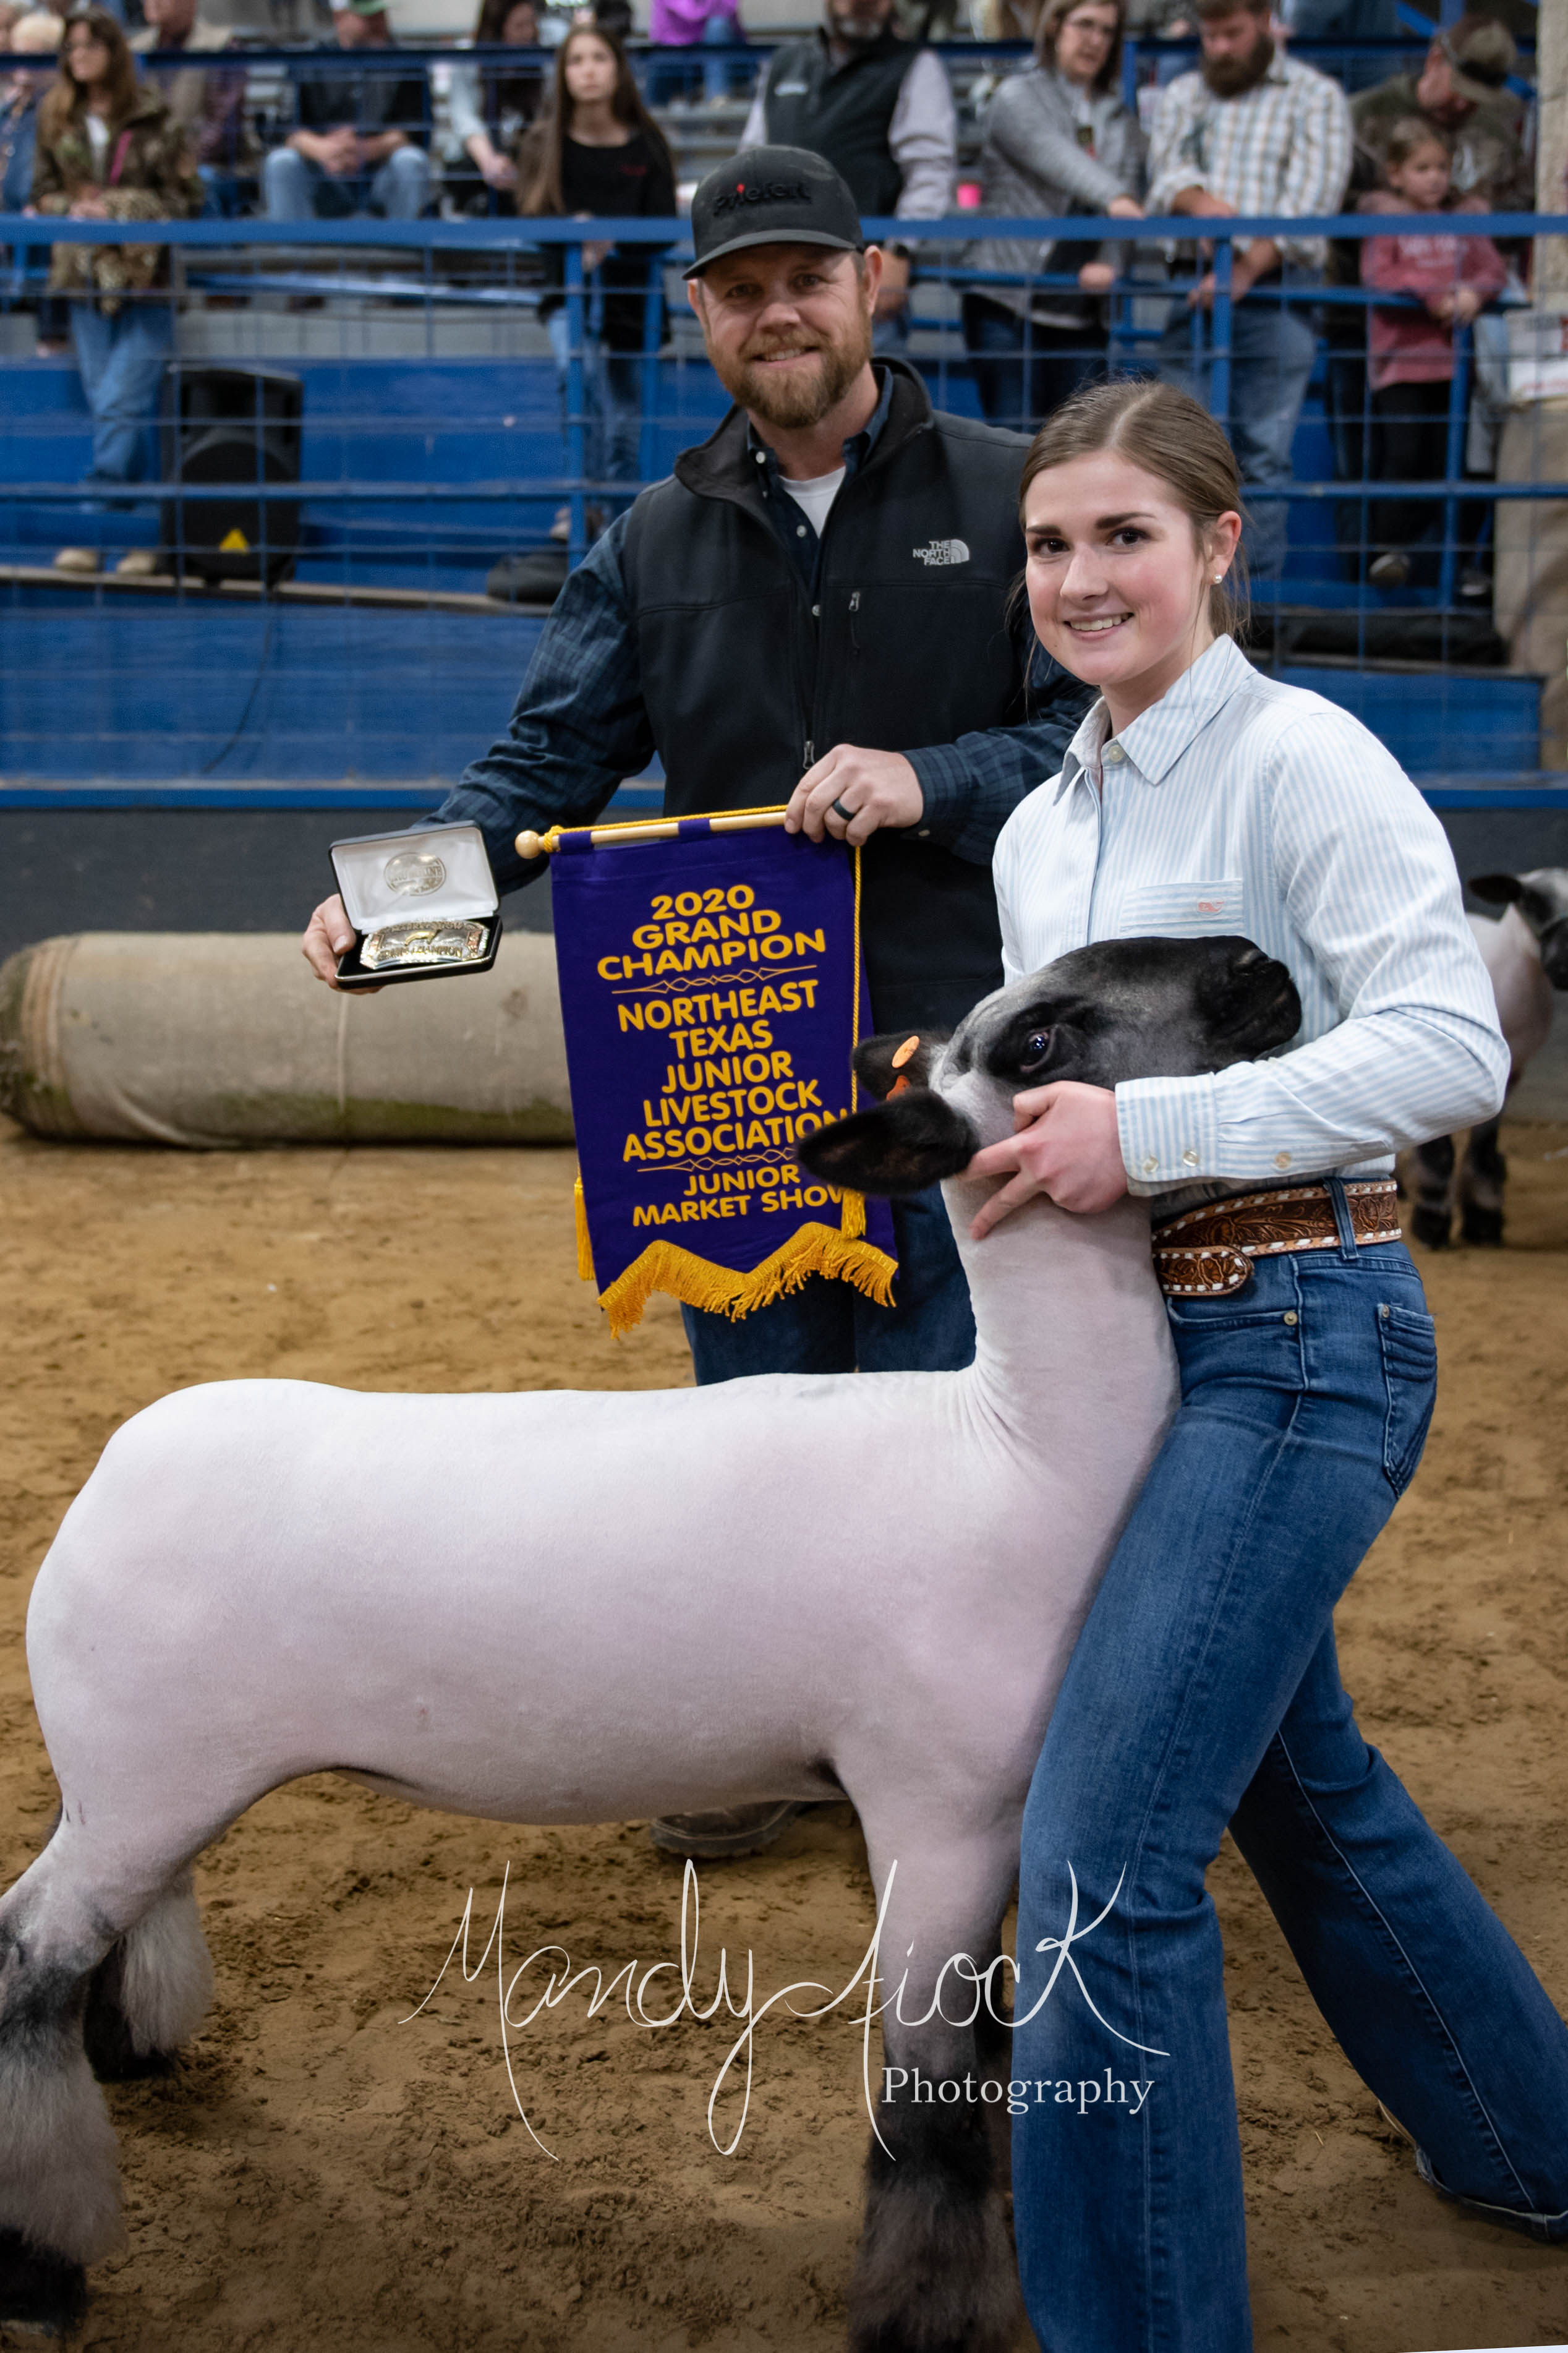 Lamb and Goat Show Awards Handed Out at 2020 NorthEast Texas Livestock Association Junior Market Livestock Show